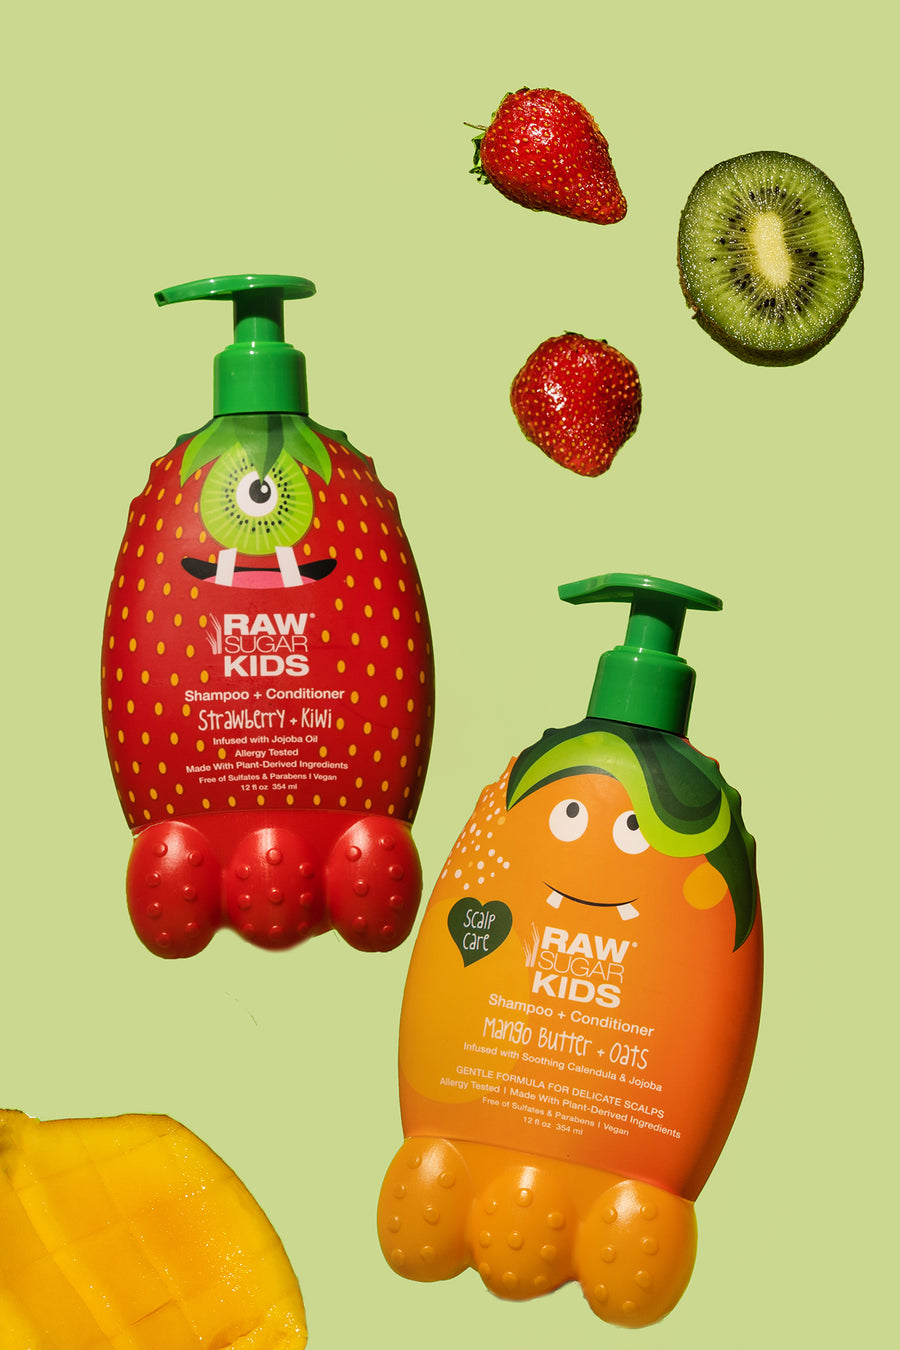 Raw Sugar Kids Monster bottles of Mango Butter + Oats and Strawberry + Kiwi are floating on a light green background with a fresh kiwi slice, strawberries and a slice of mango